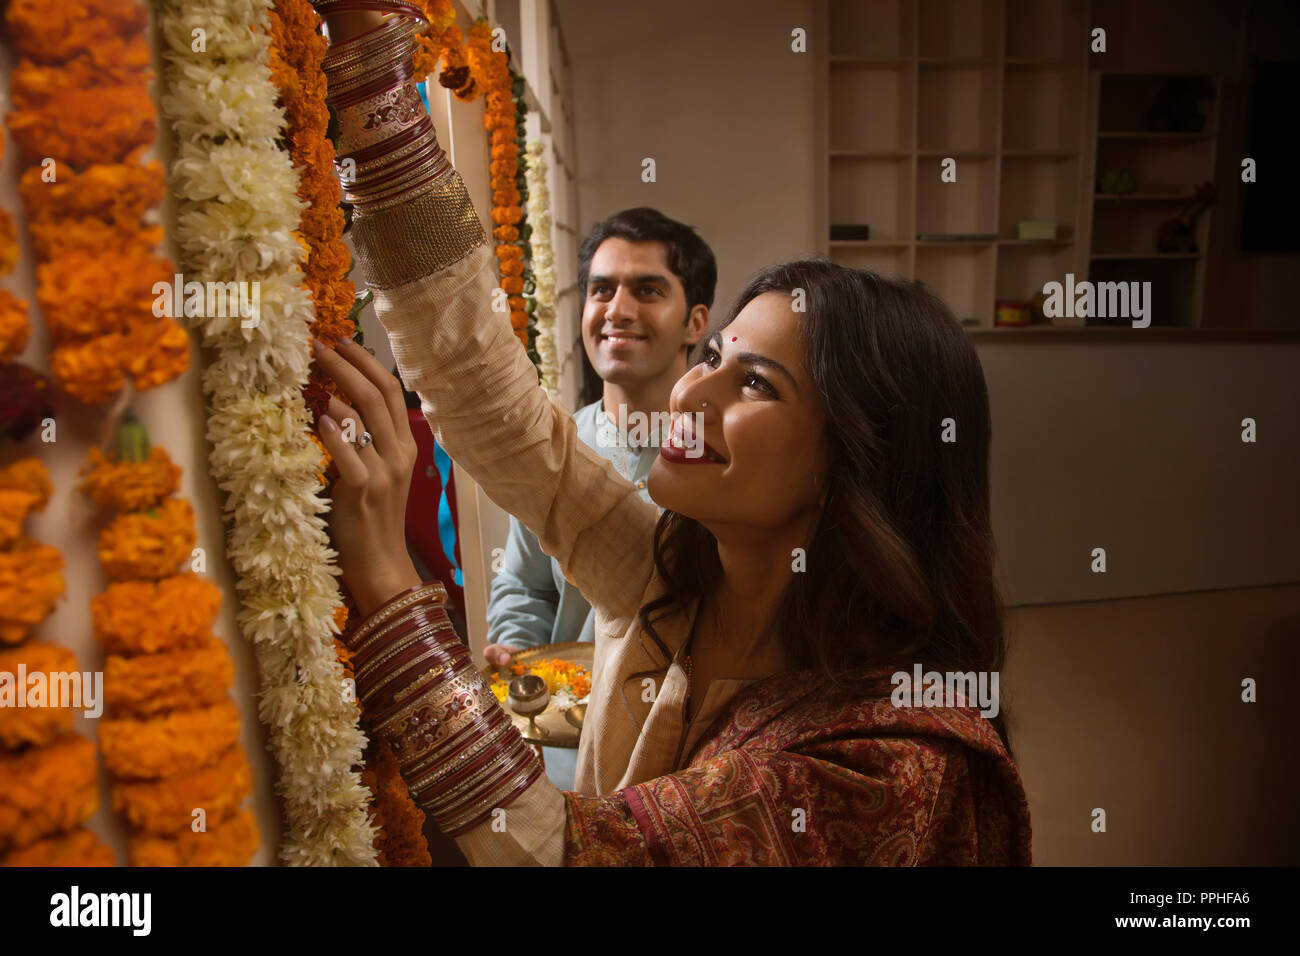 Close up of happy young couple in traditional dress decorating their home with flowers. Stock Photo